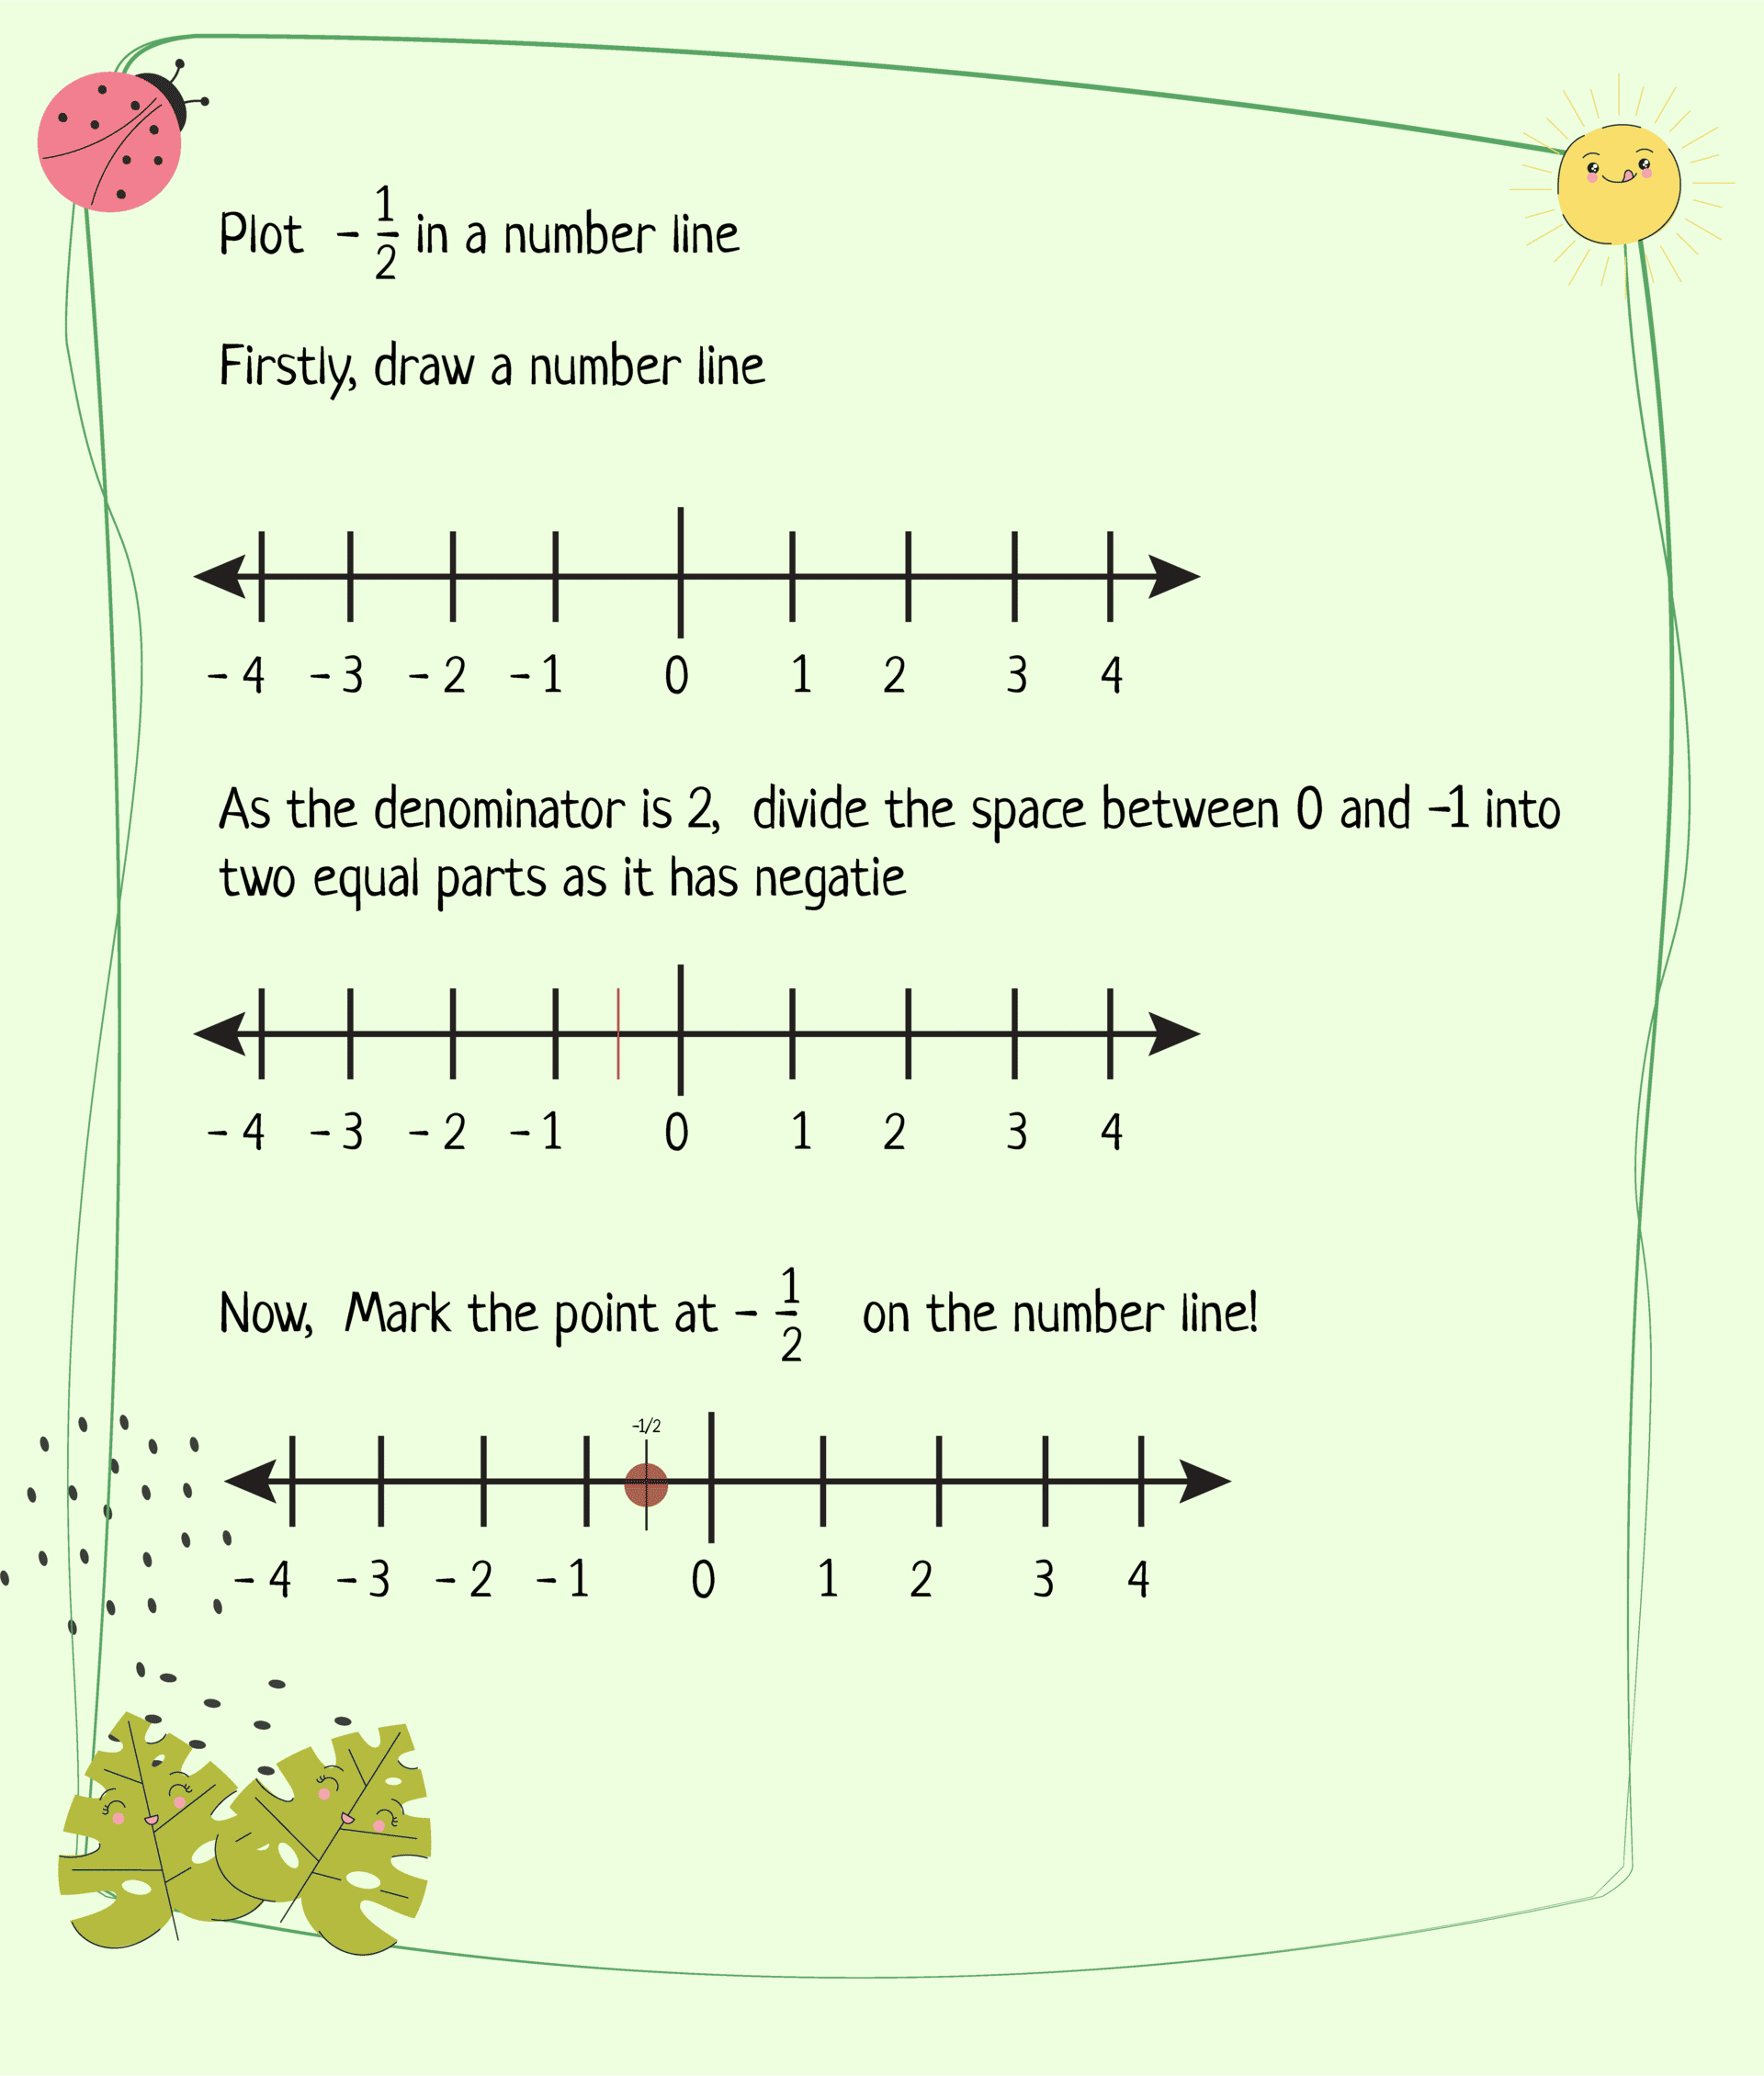 Steps of Plotting Negative Numbers in a Number Line-01